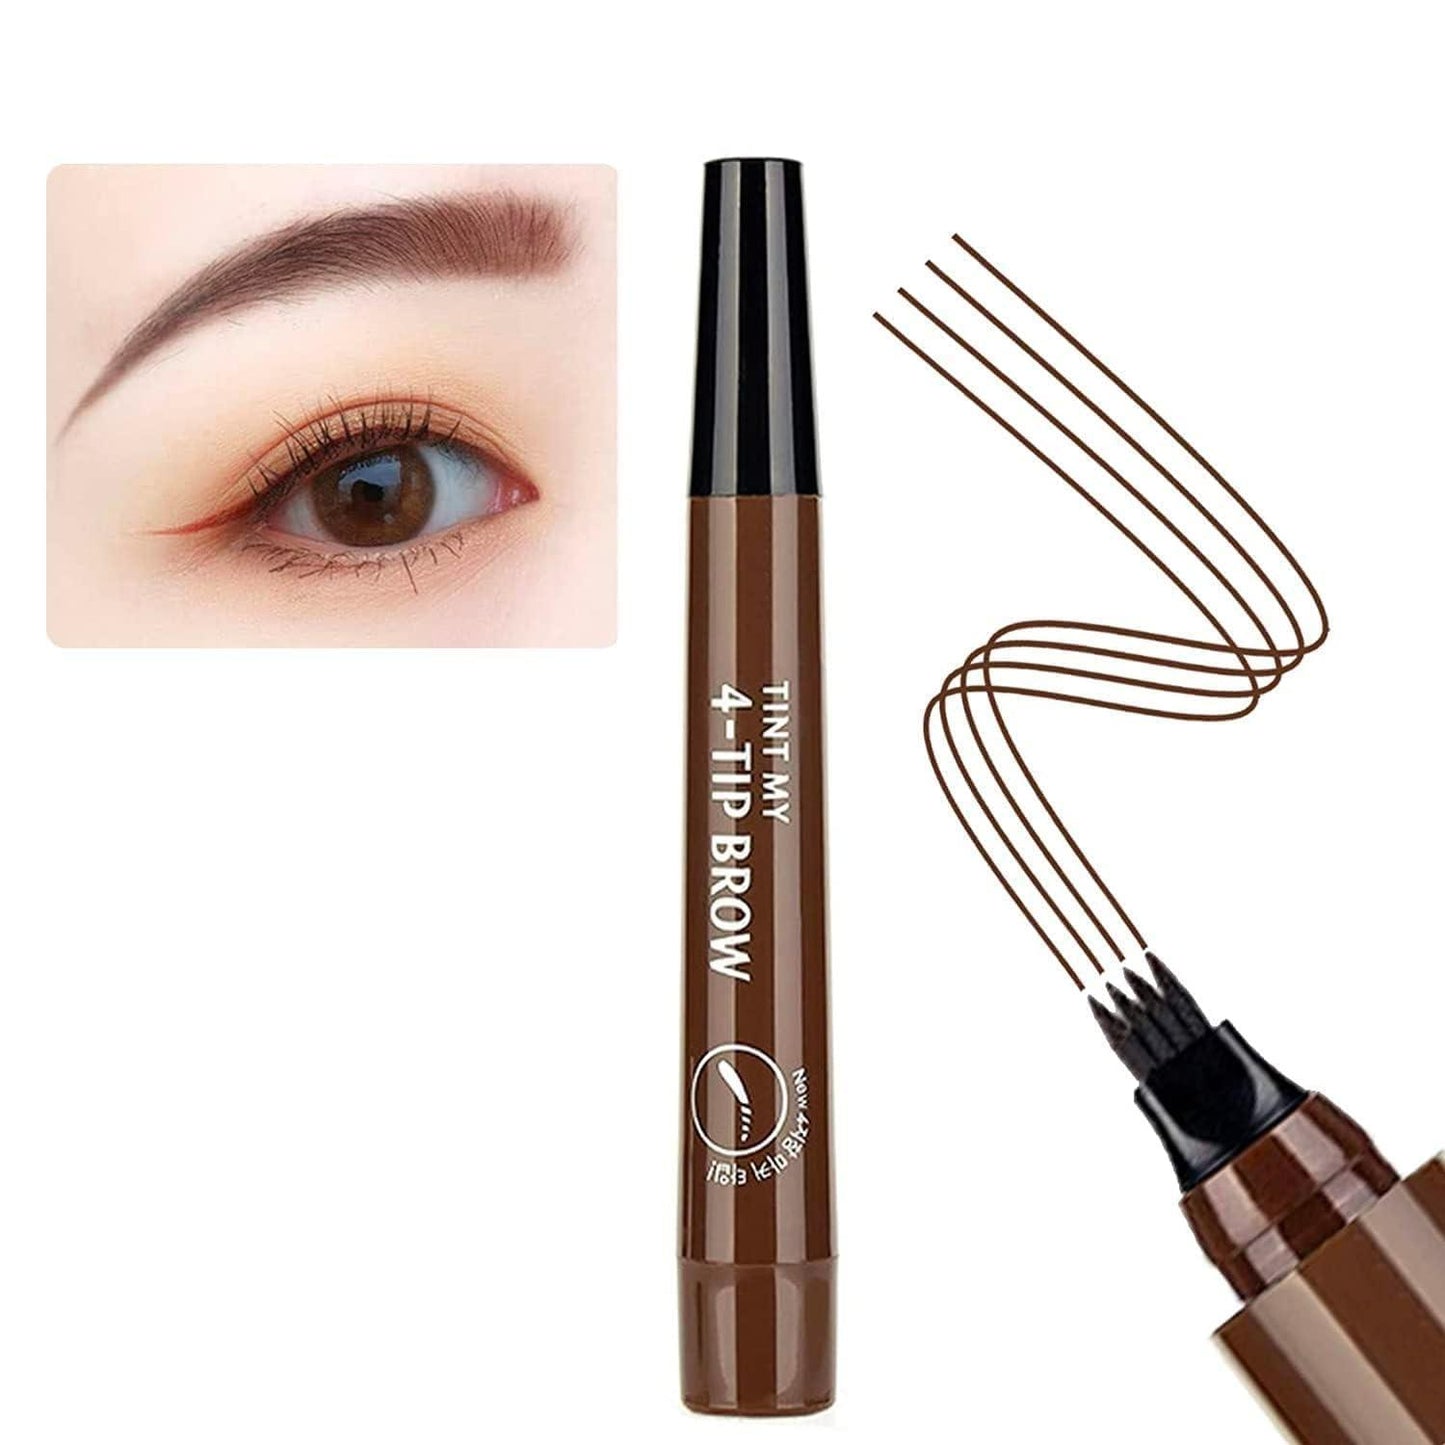 Waterproof 4 Points Microblading Eyebrow Pen with a Micro-Fork Tip Applicator